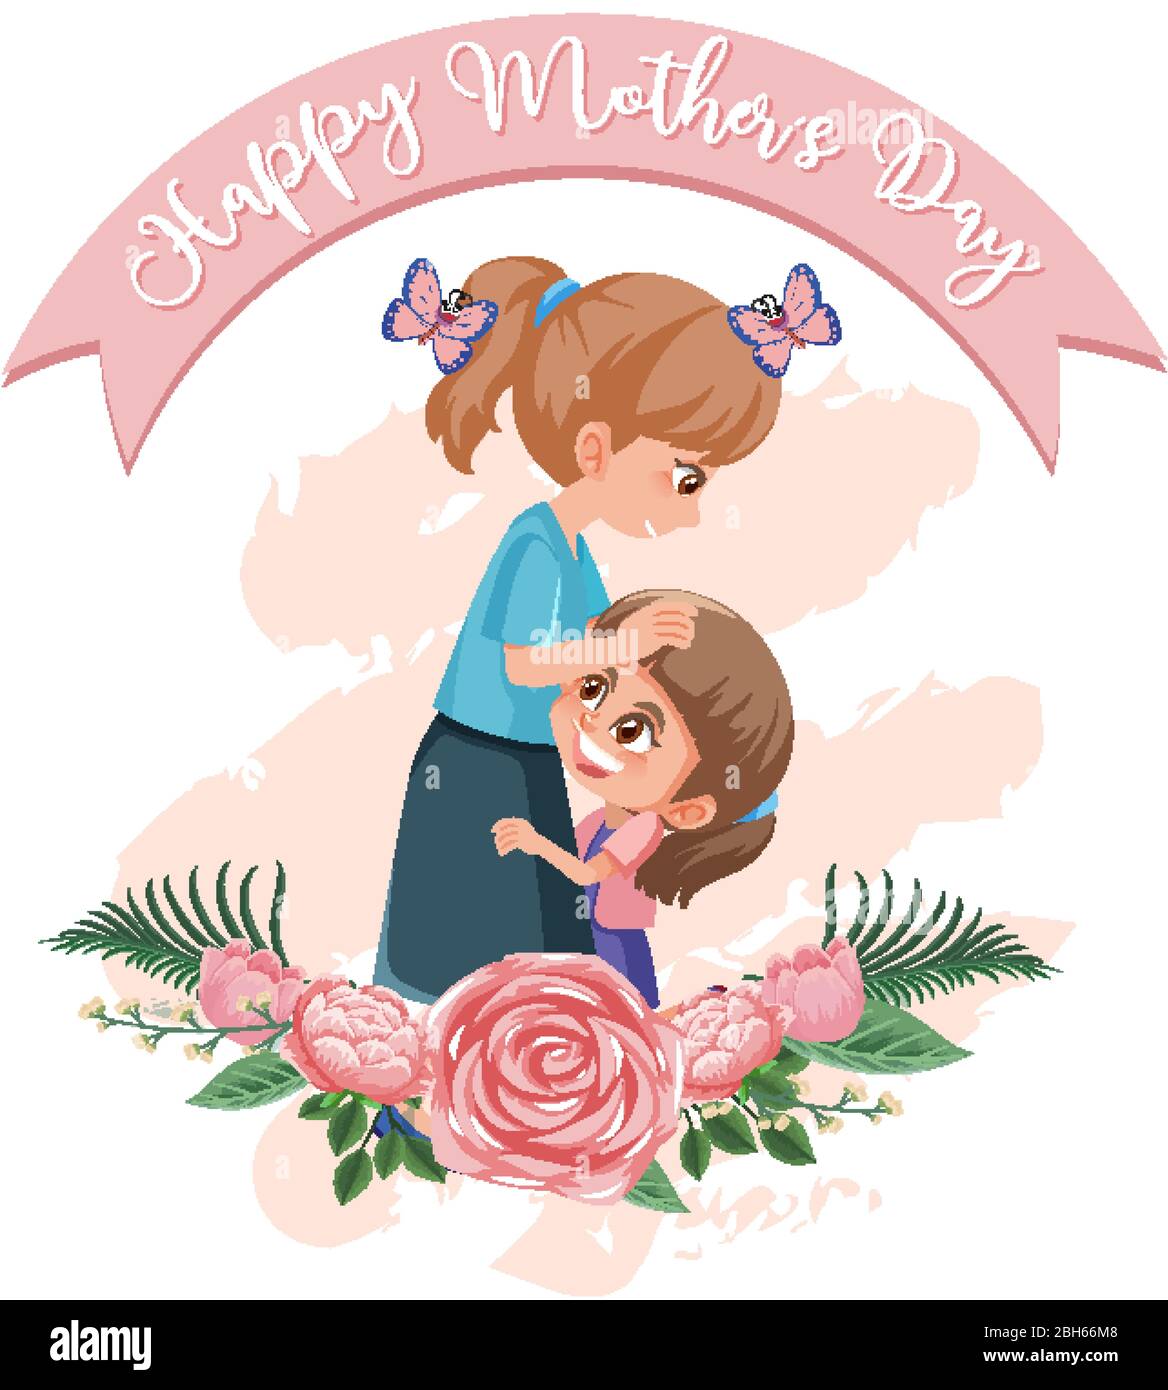 Template design for happy mother's day with mom and daughter ...